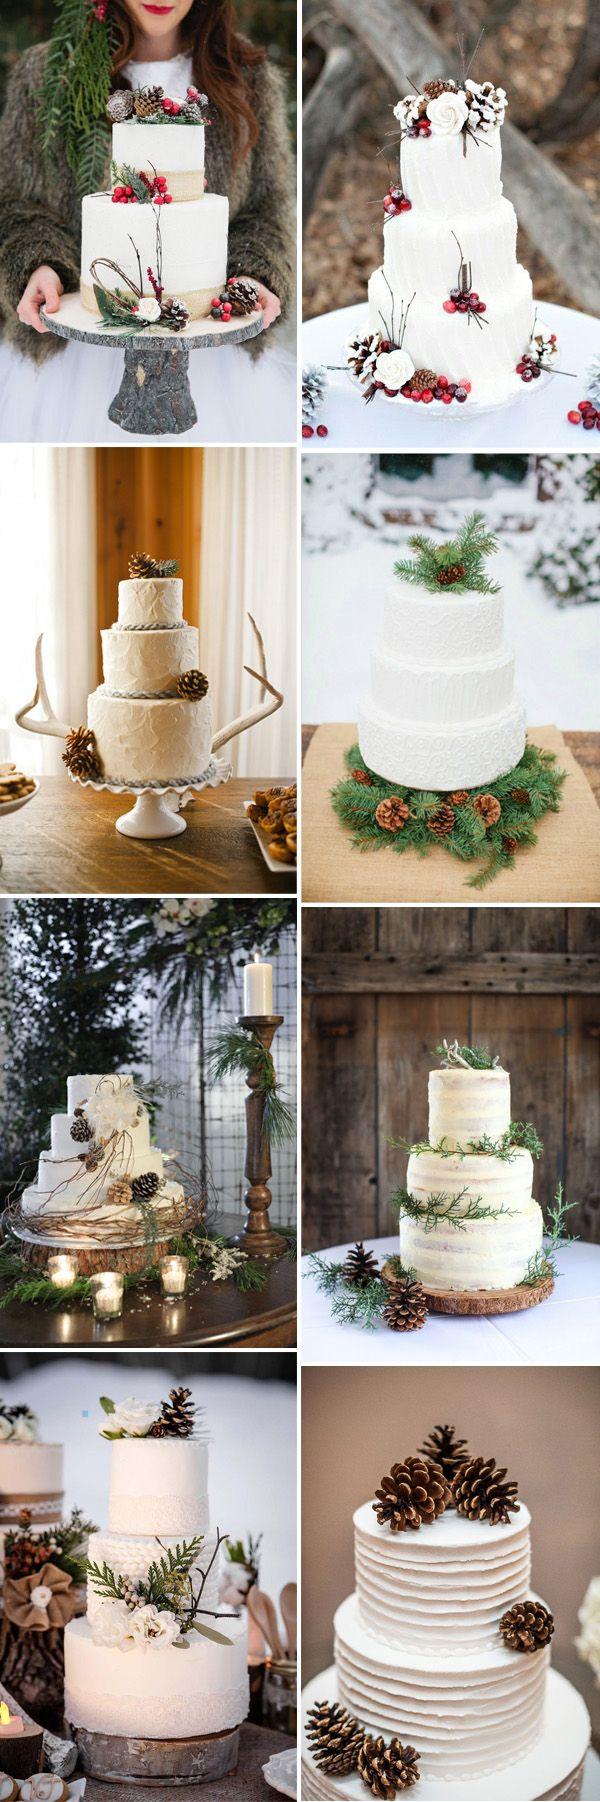 Wedding - 21 Beautiful Wedding Cakes With Winter Touches For 2015